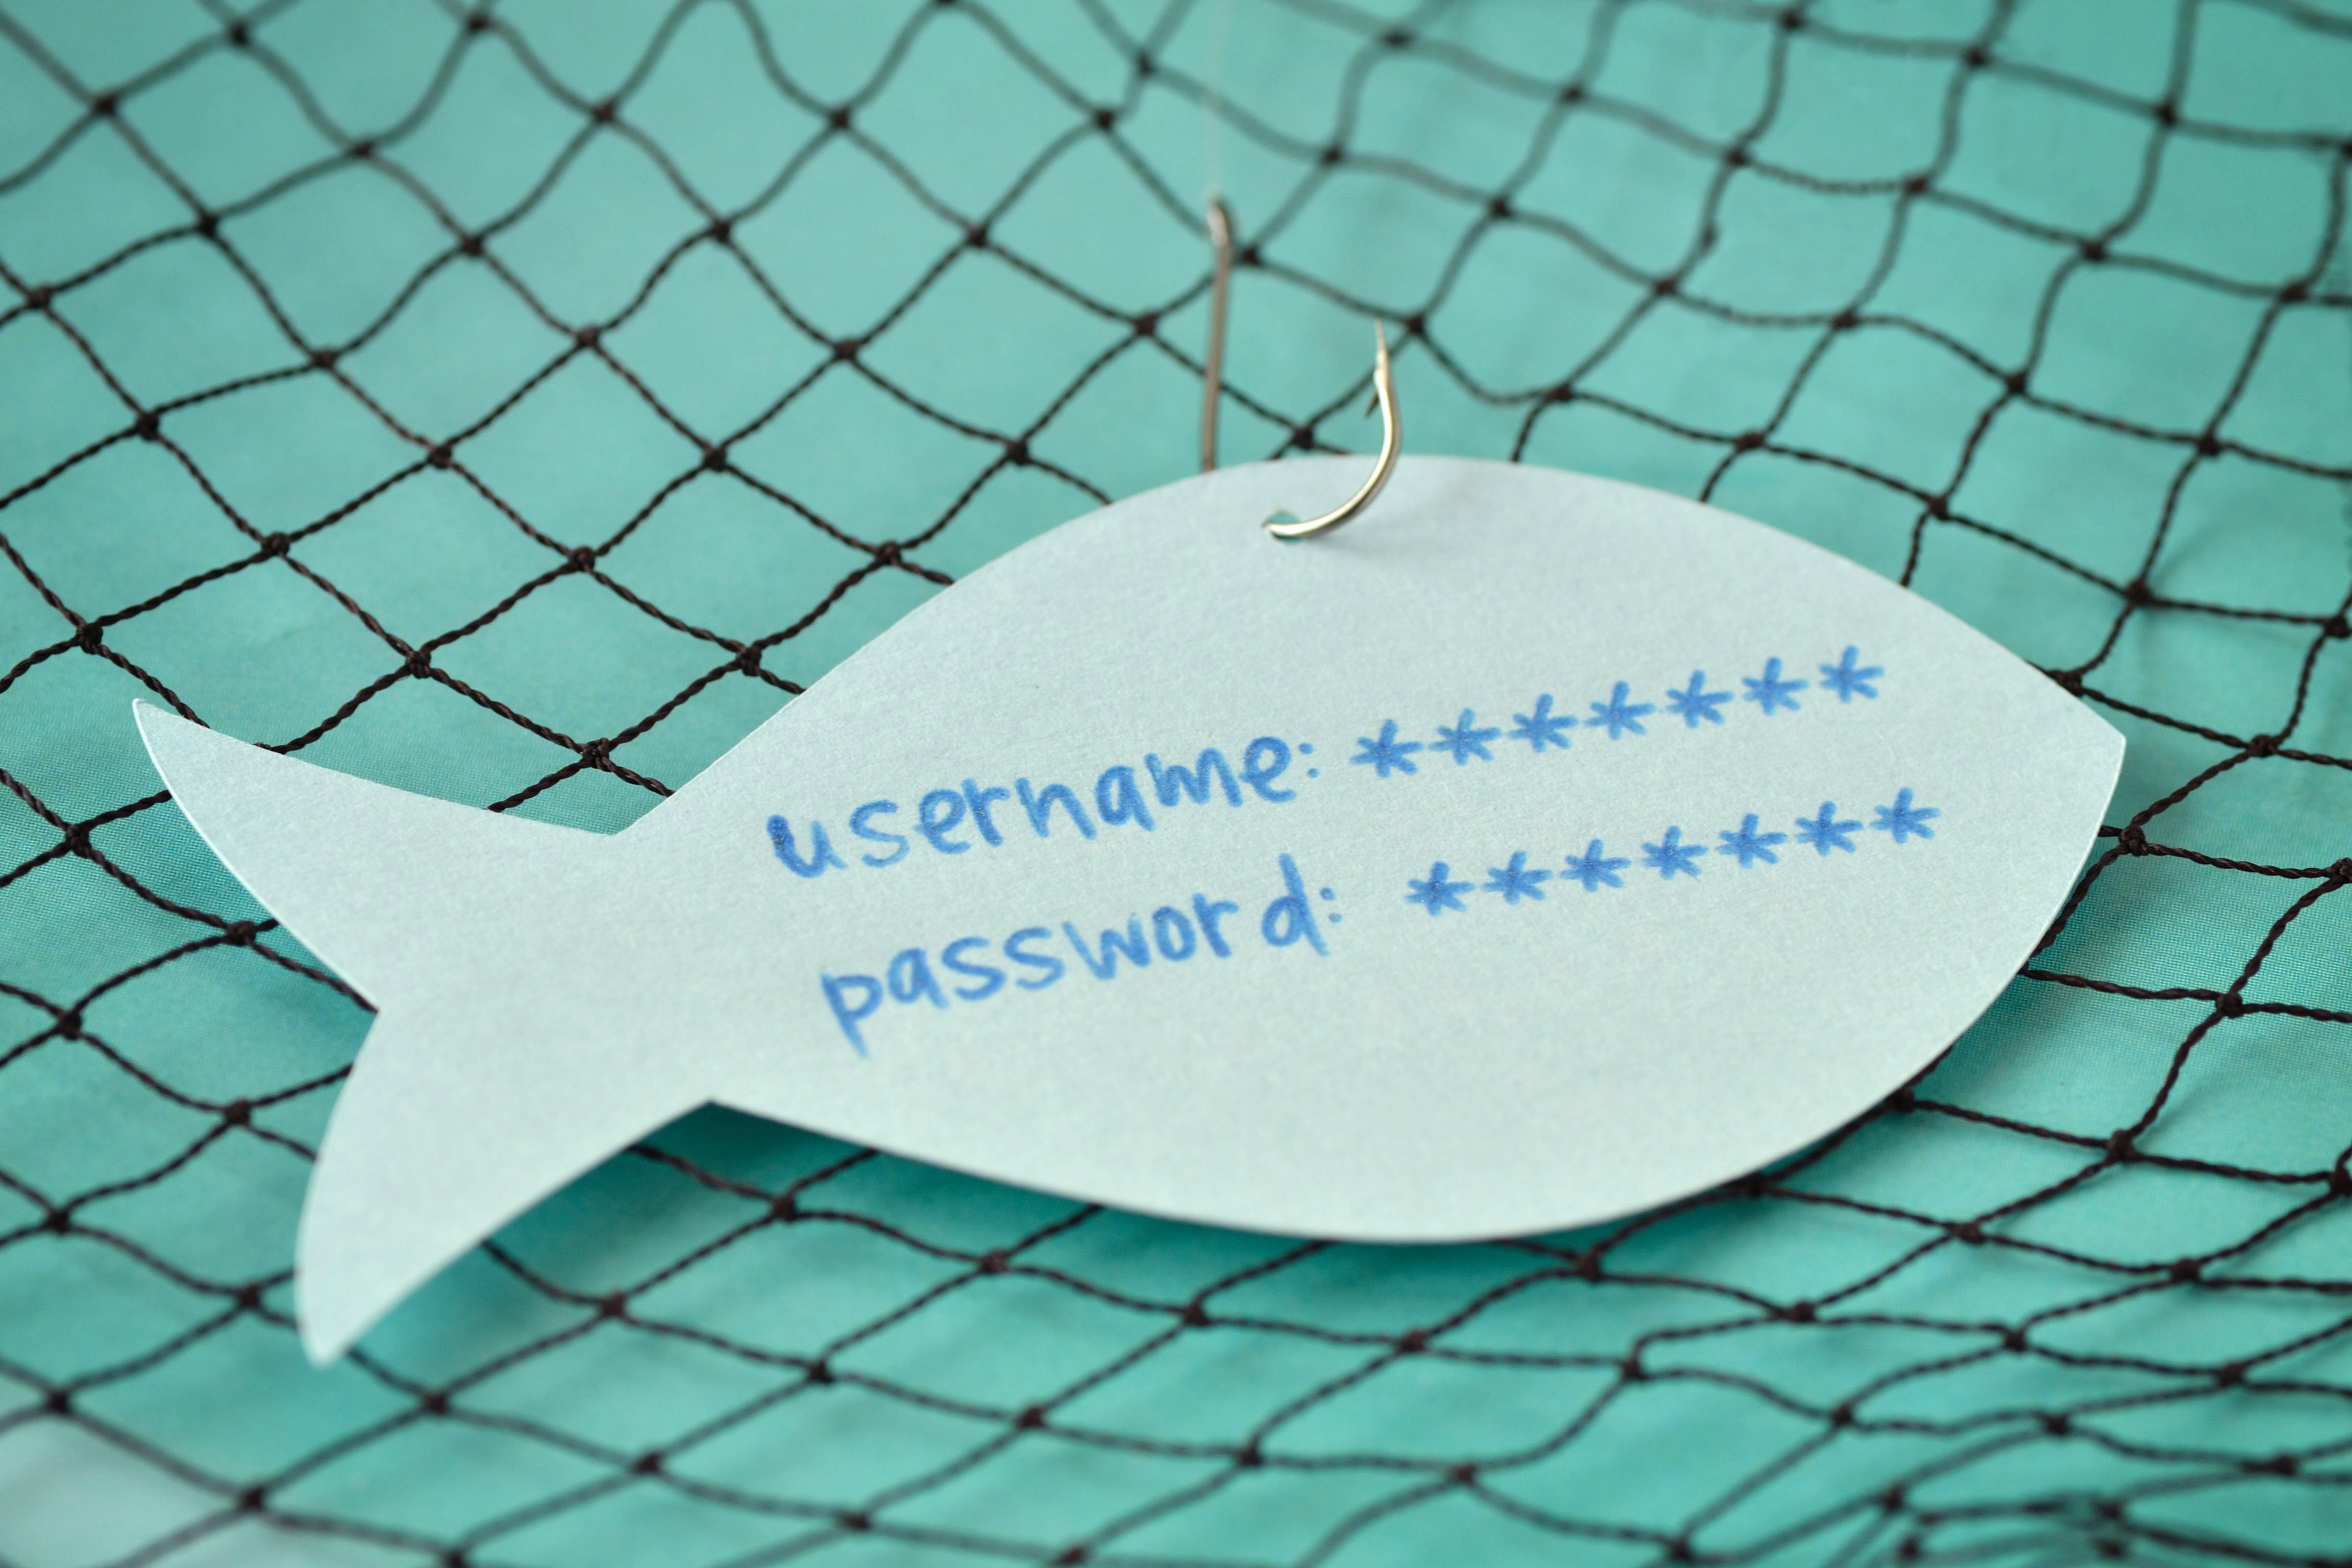 paper shaped like a fish, with fish hook attached; text reads username, password